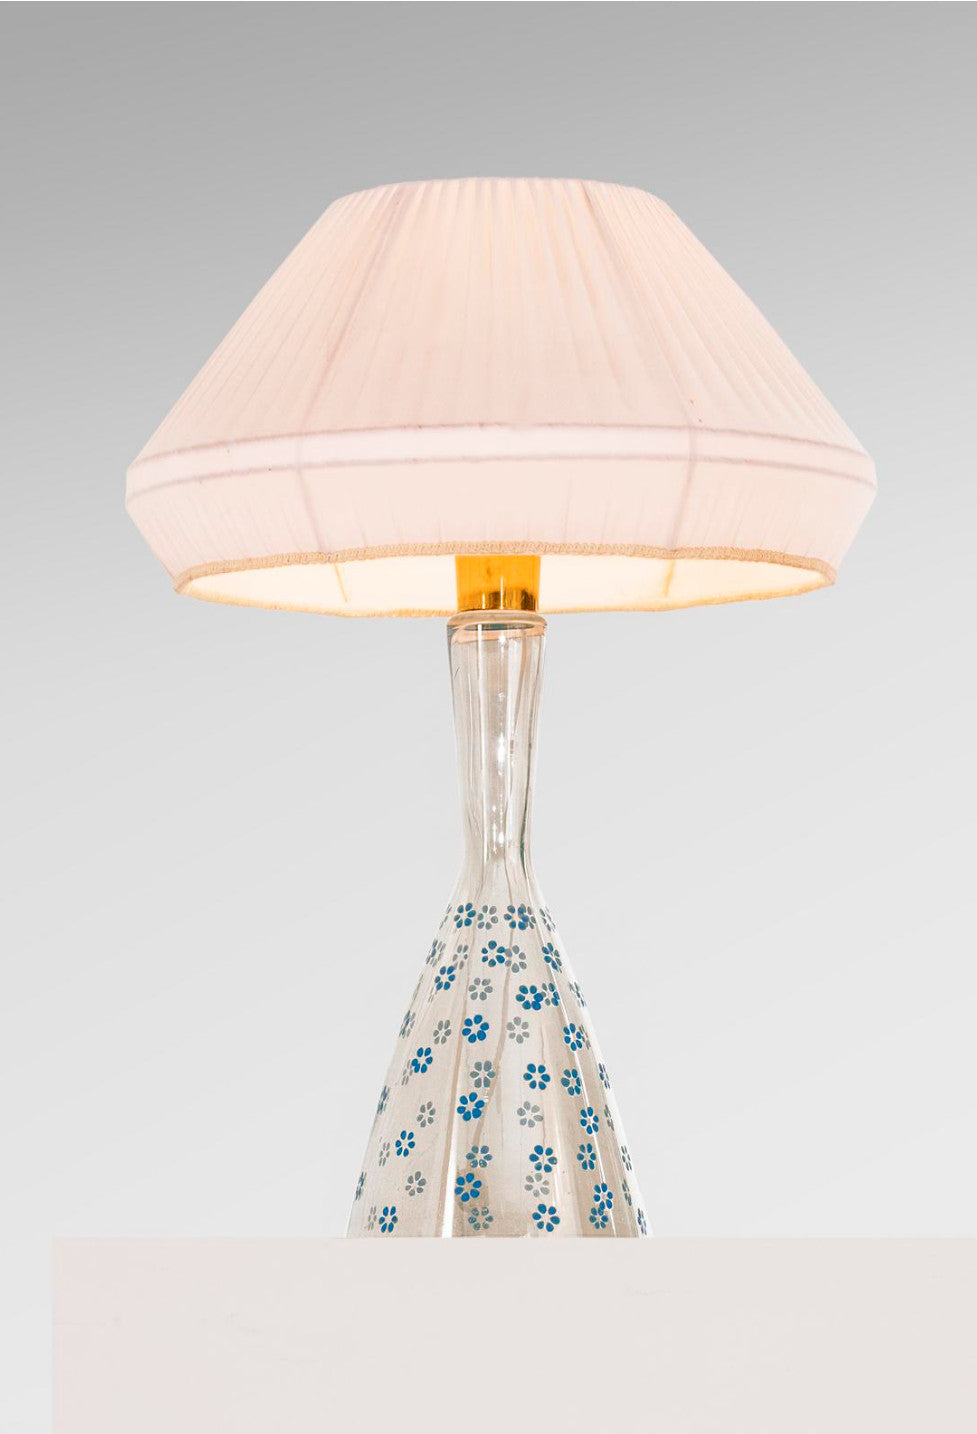 Incredibly Rare Hand-Painted Glass Lamp by Lisa Johansson-Pape, 1957